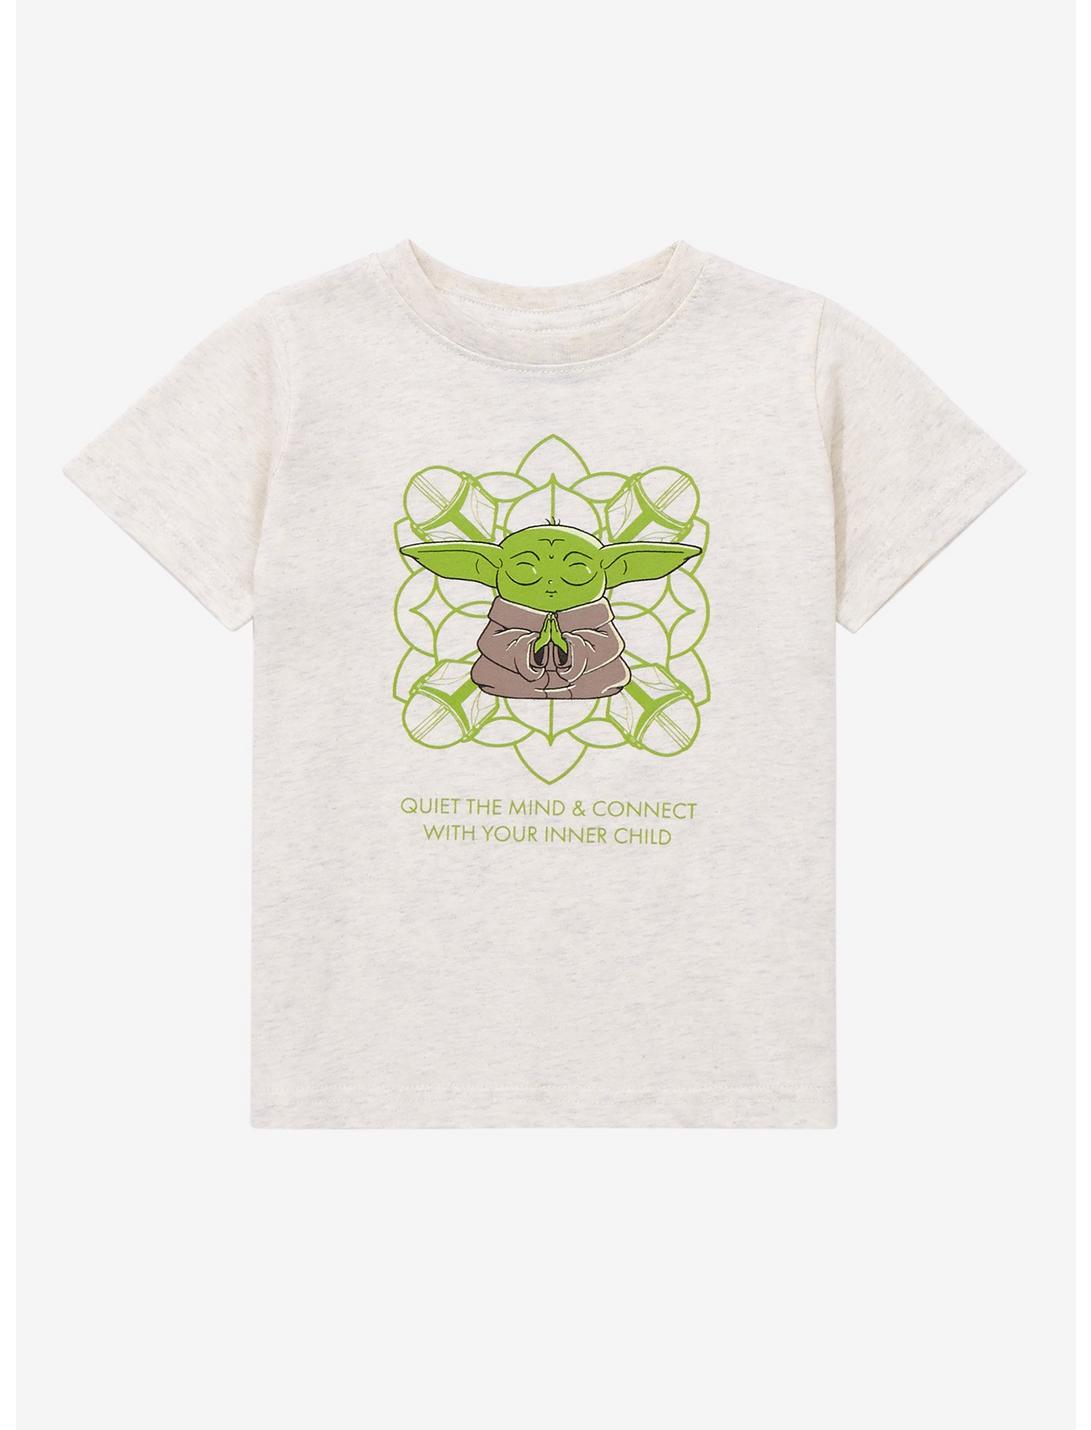 Star Wars The Mandalorian The Child Meditation Toddler T-Shirt - BoxLunch Exclusive, NATURAL, hi-res